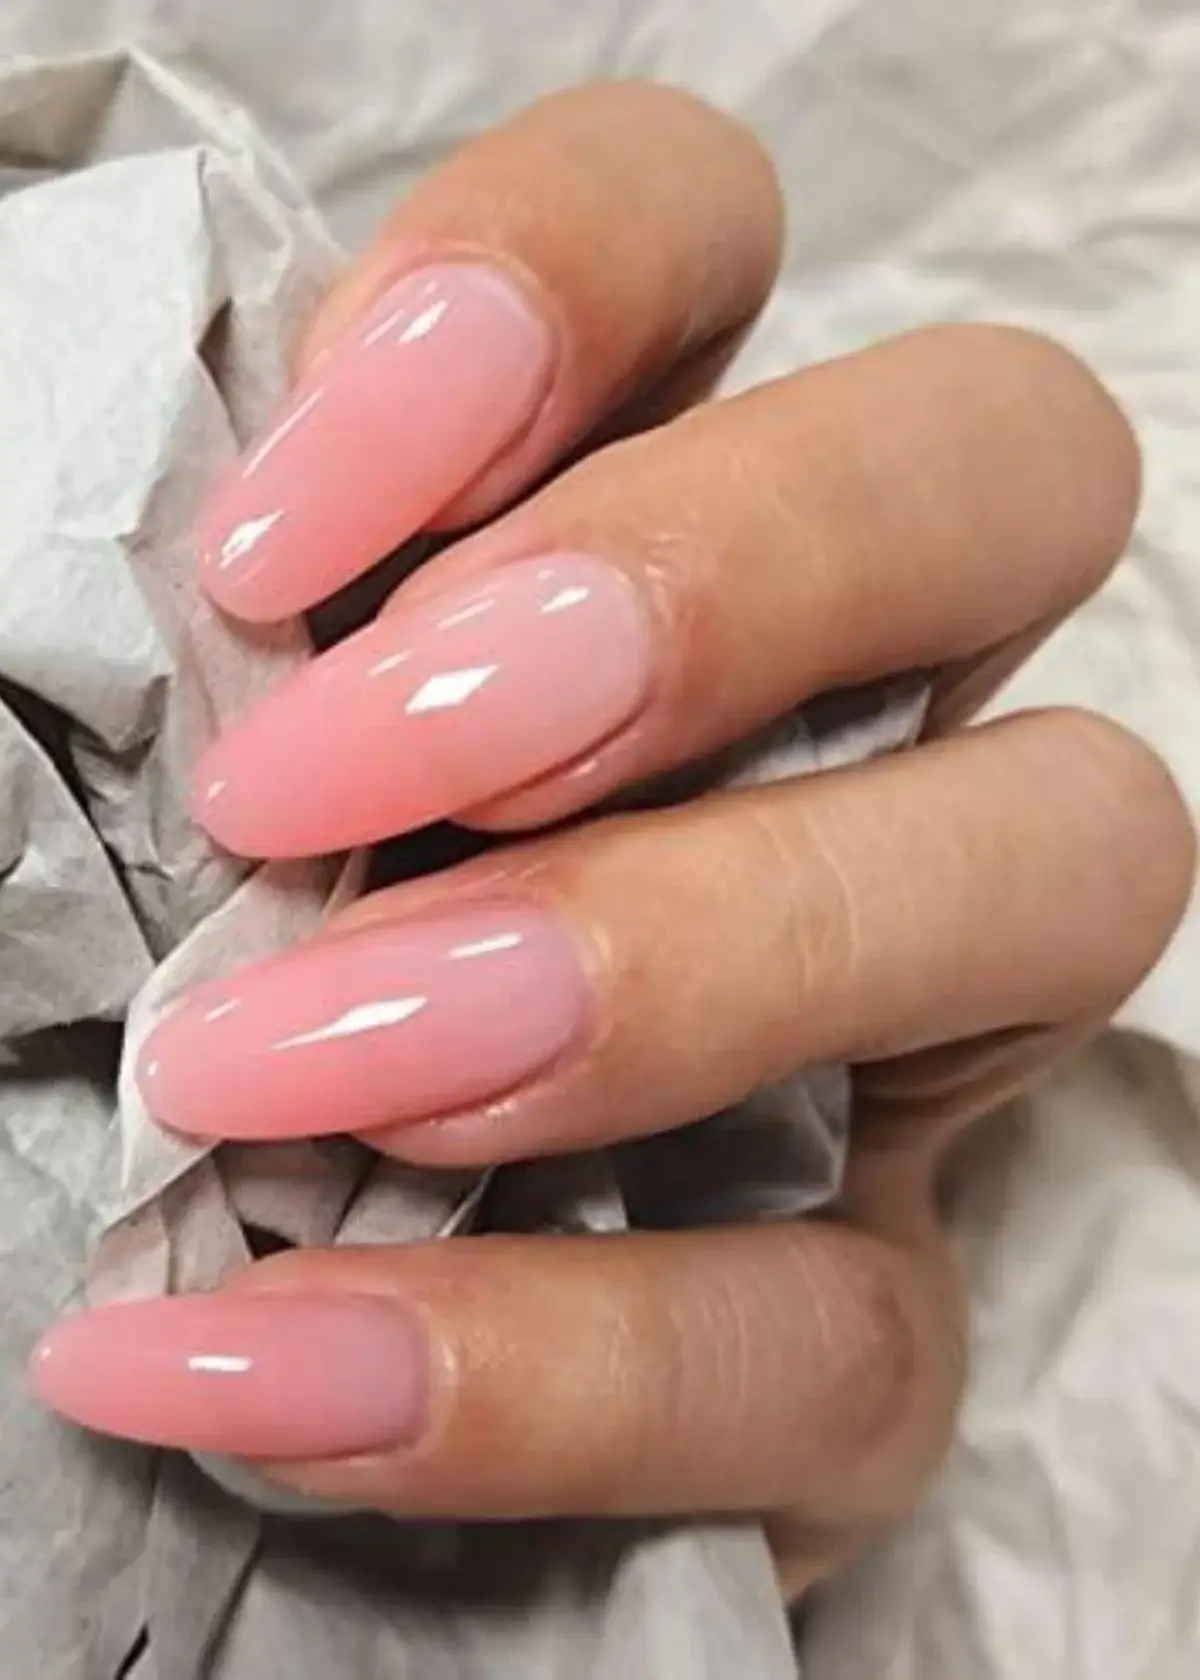 How to choose the right polygel nail kit?